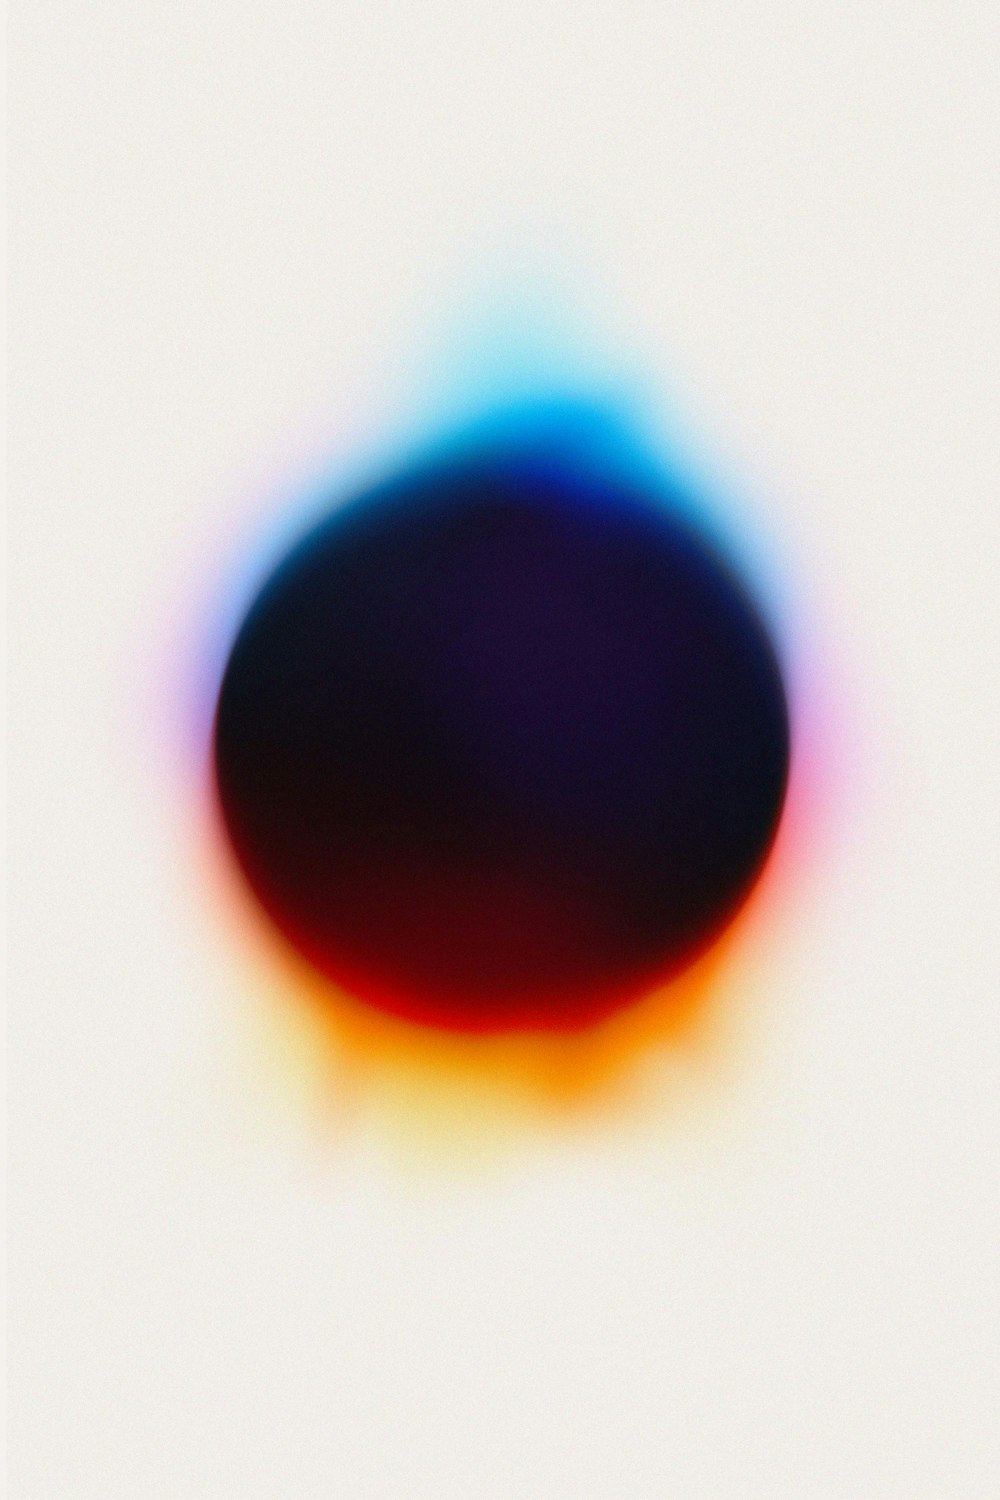 a blurry image of a blue and red object